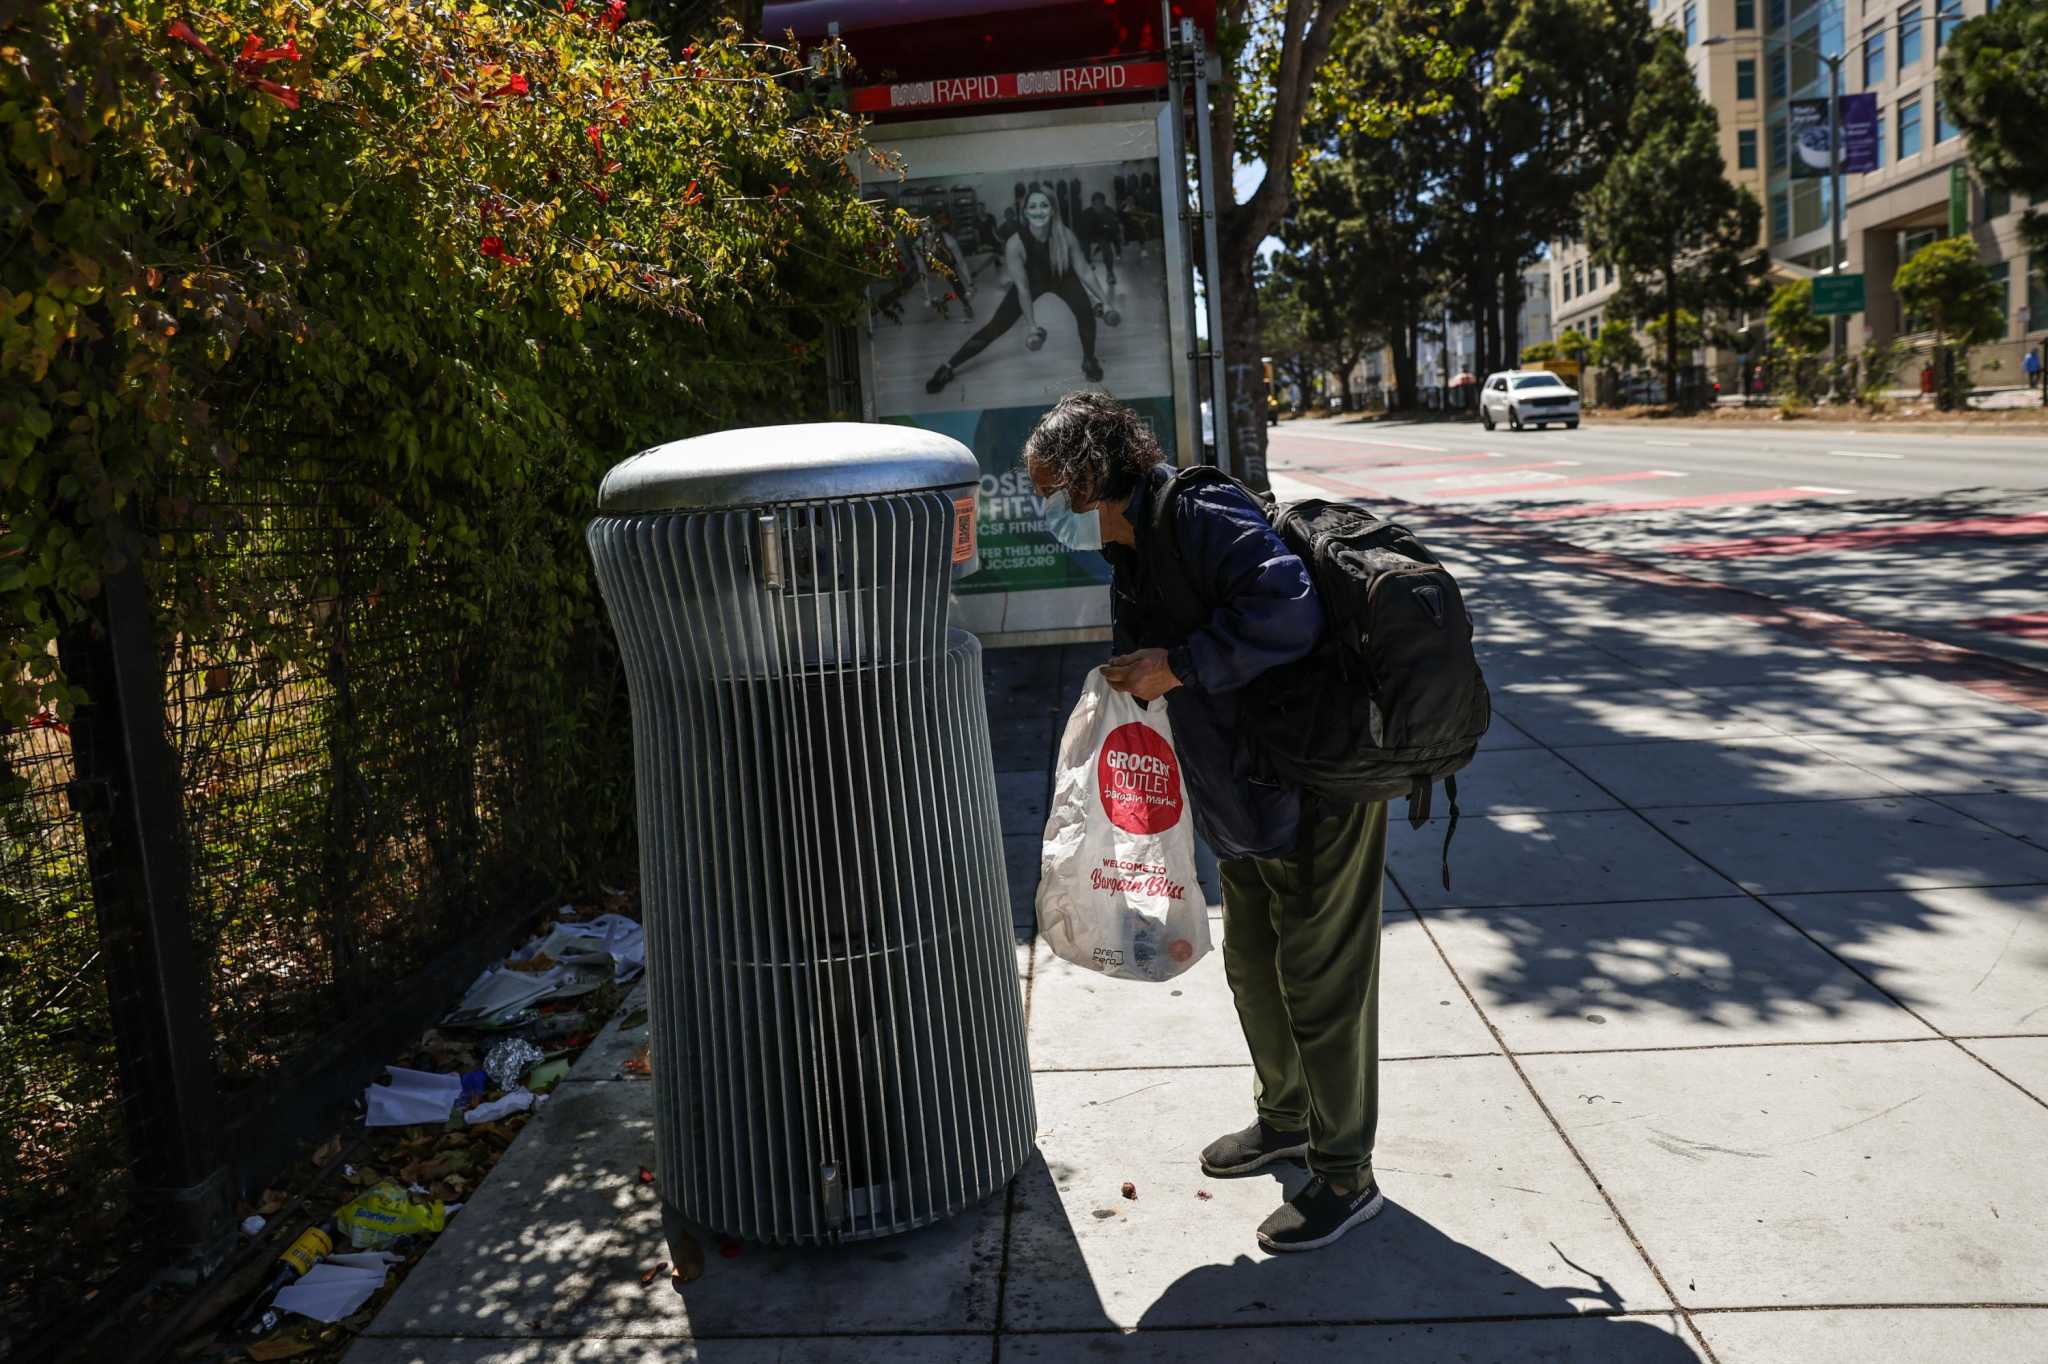 I checked out the $20,000 trash can model and other bins S.F. is testing.  Here's what I found